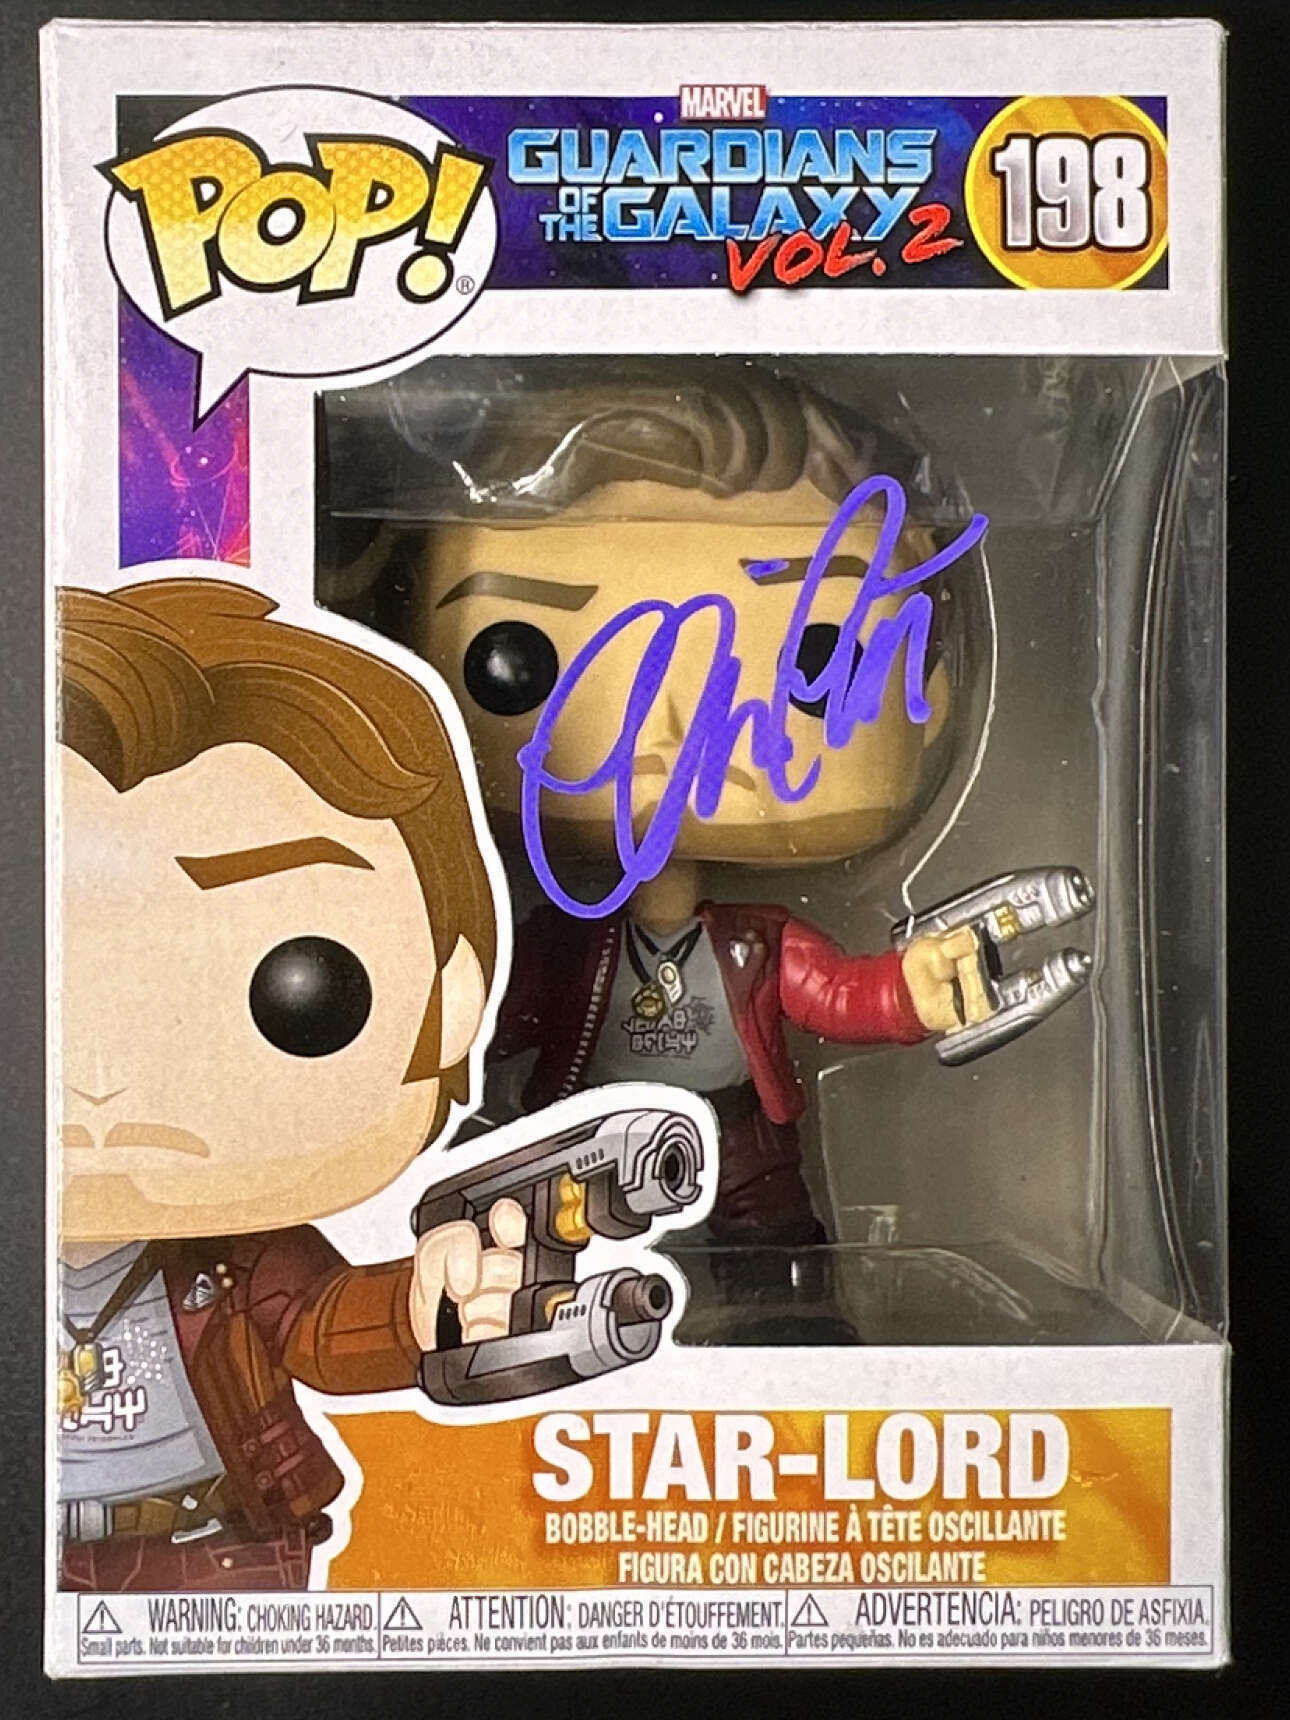 Funko Pop! Star-lord CHASE #198 Guardians Of The Galaxy 2